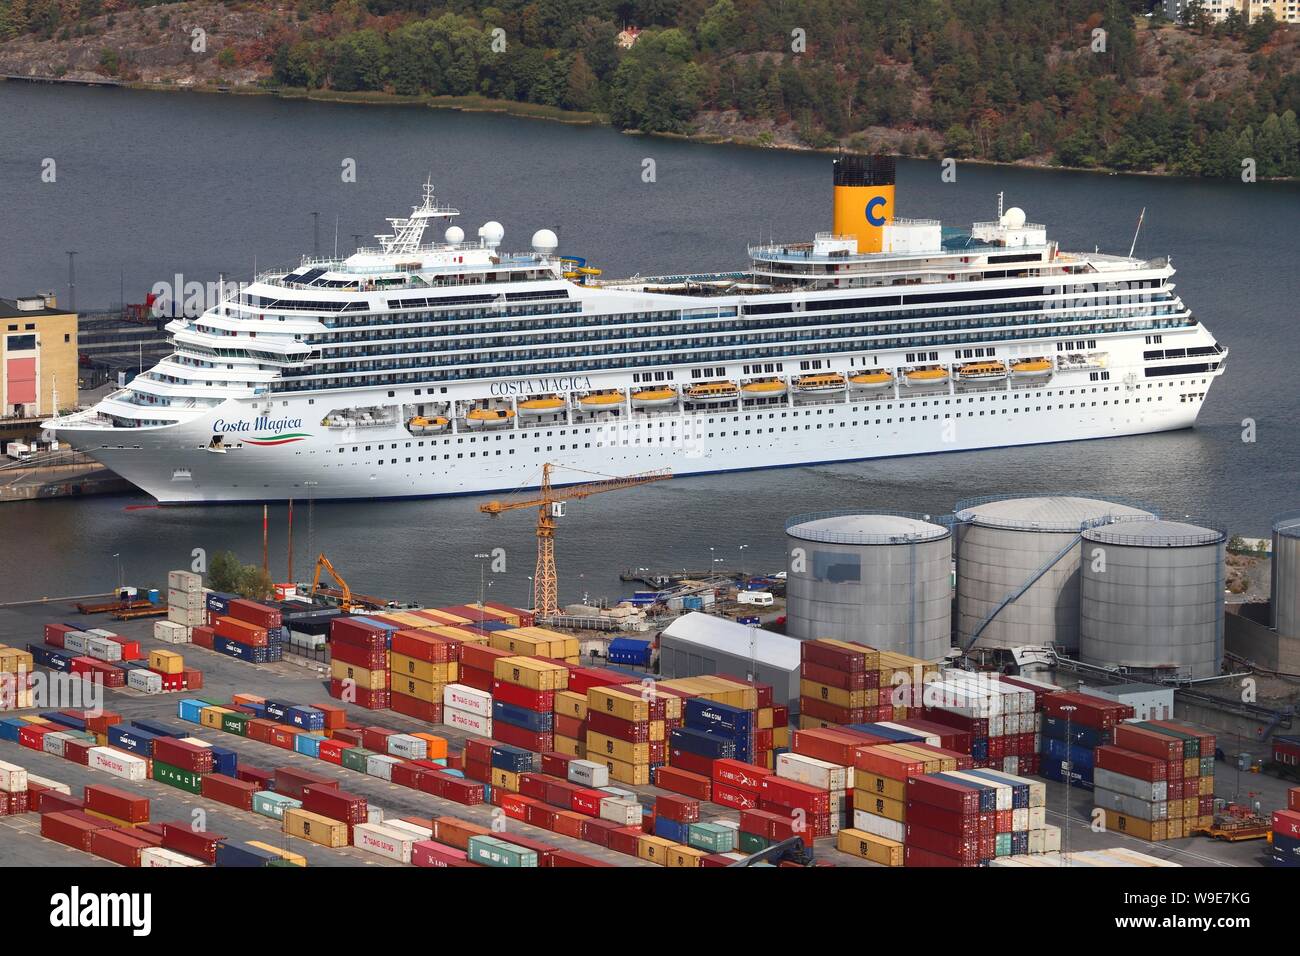 STOCKHOLM, SWEDEN - AUGUST 24, 2018: Costa Magica ship at Stockholm harbor, Sweden. Costa Cruises is part of Carnival Corporation. Stock Photo